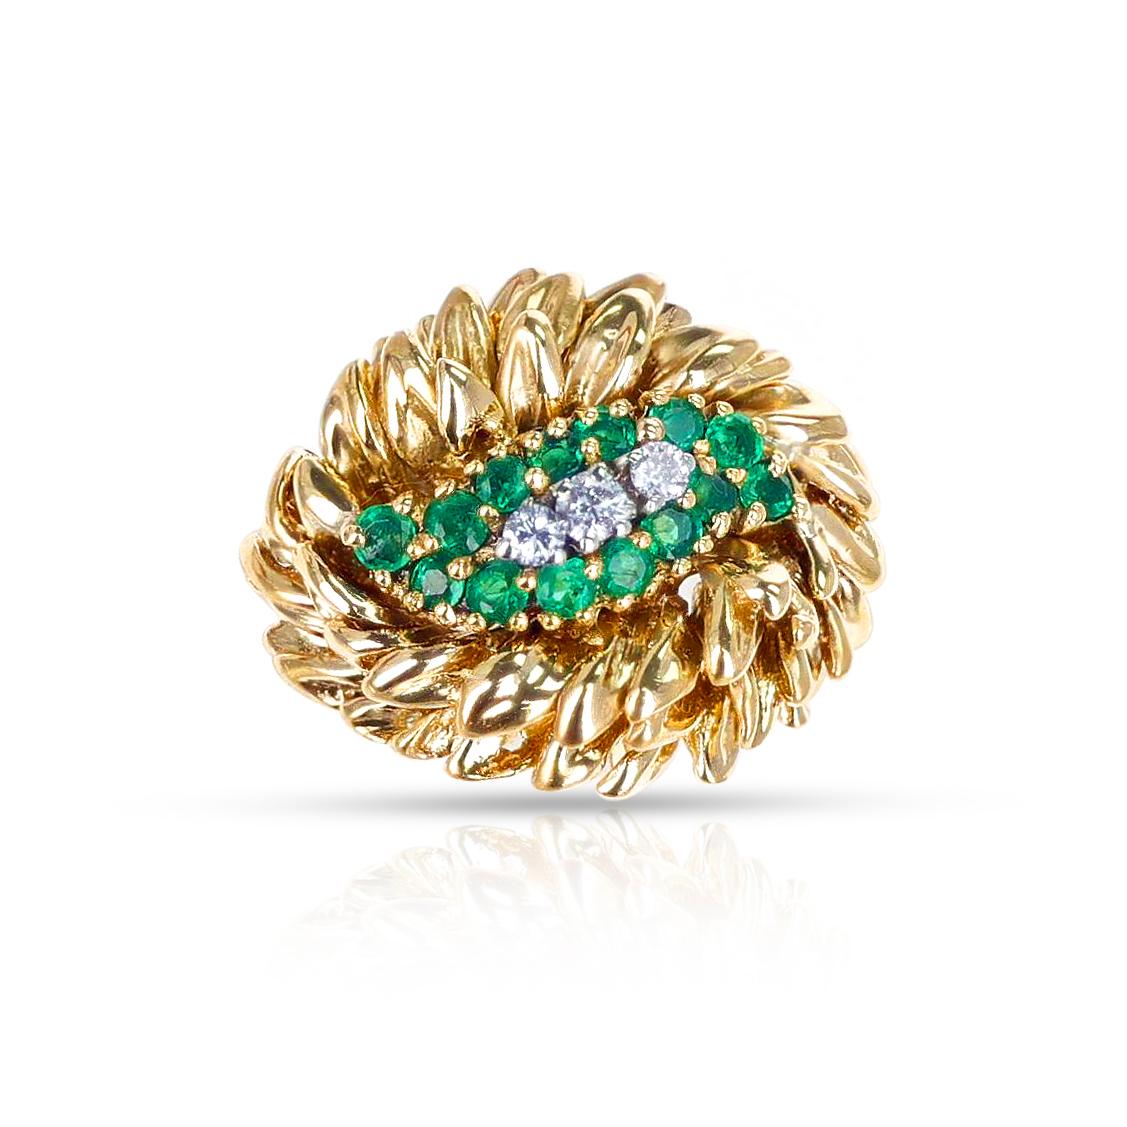 A Tiffany & Co. Emerald and Diamond Gold Cocktail Ring made with round-cut diamonds and emeralds. The ring size is 6.25 US. 
